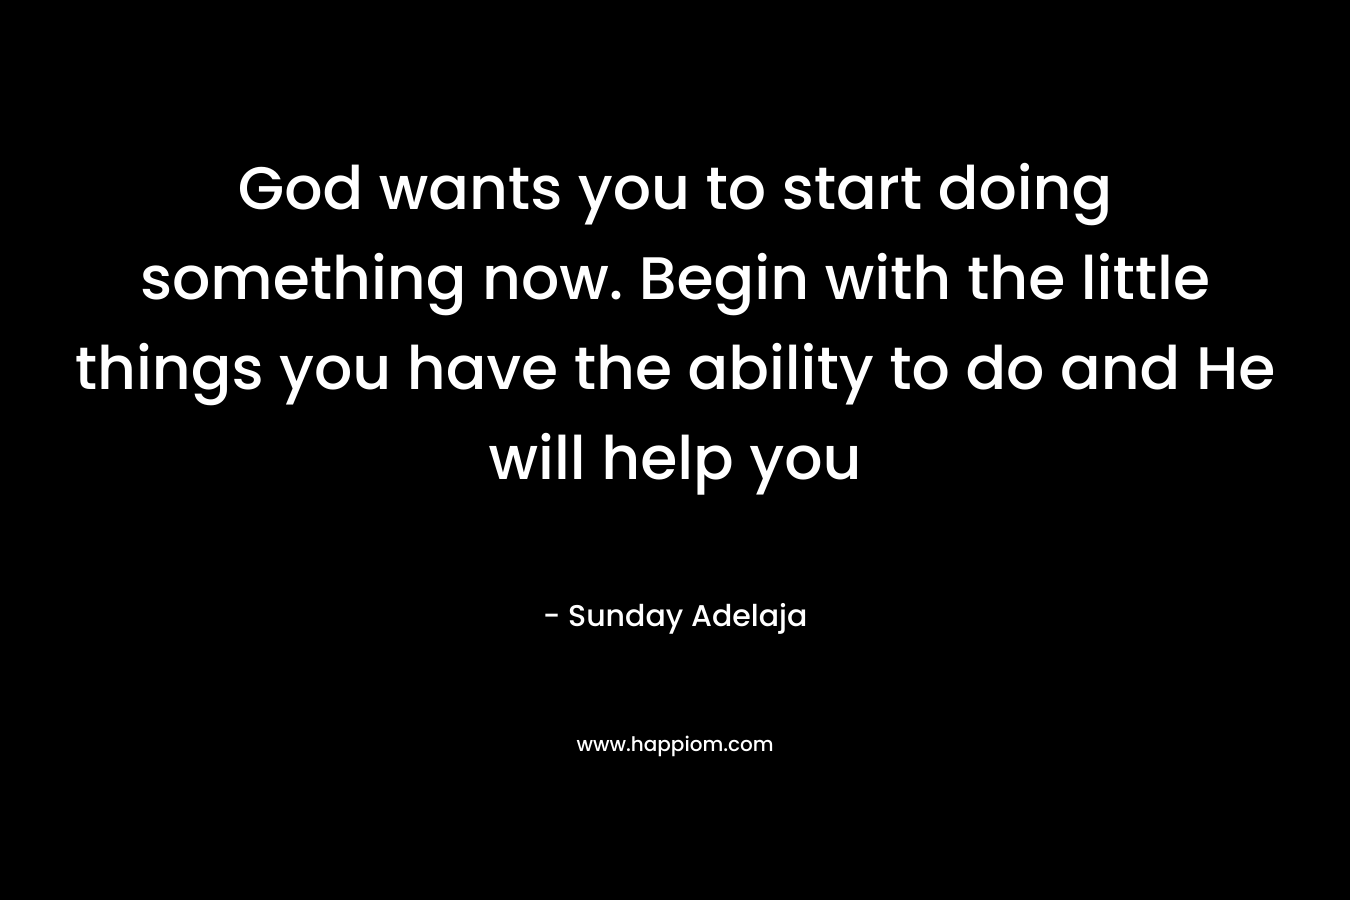 God wants you to start doing something now. Begin with the little things you have the ability to do and He will help you